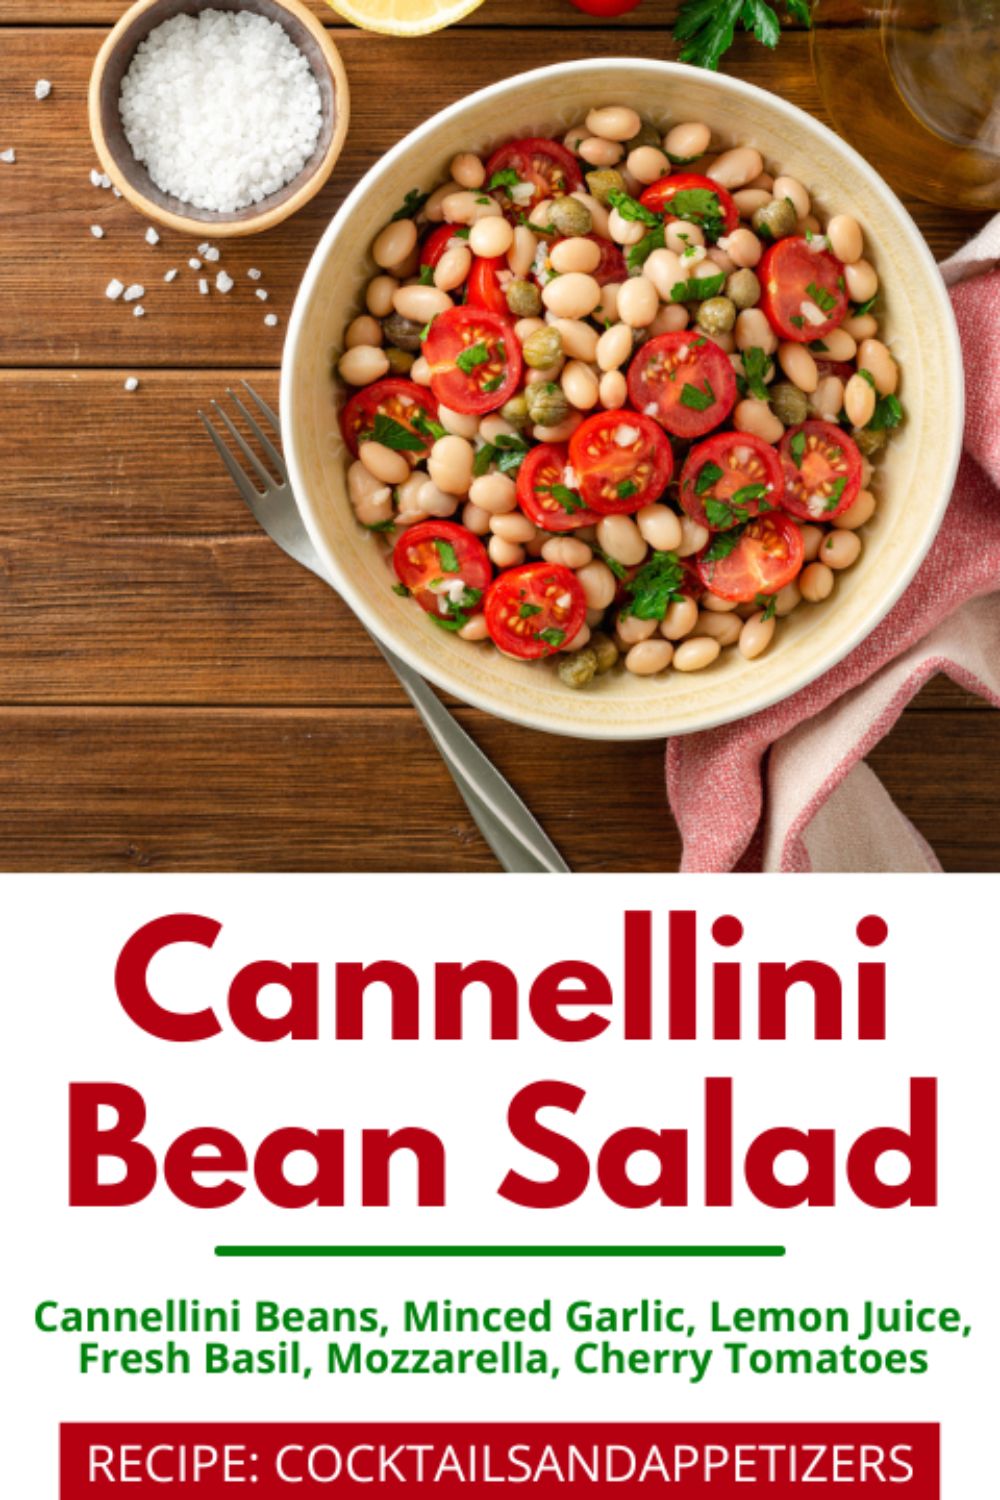 Cannellini Bean salad in a bowl on a wood table.